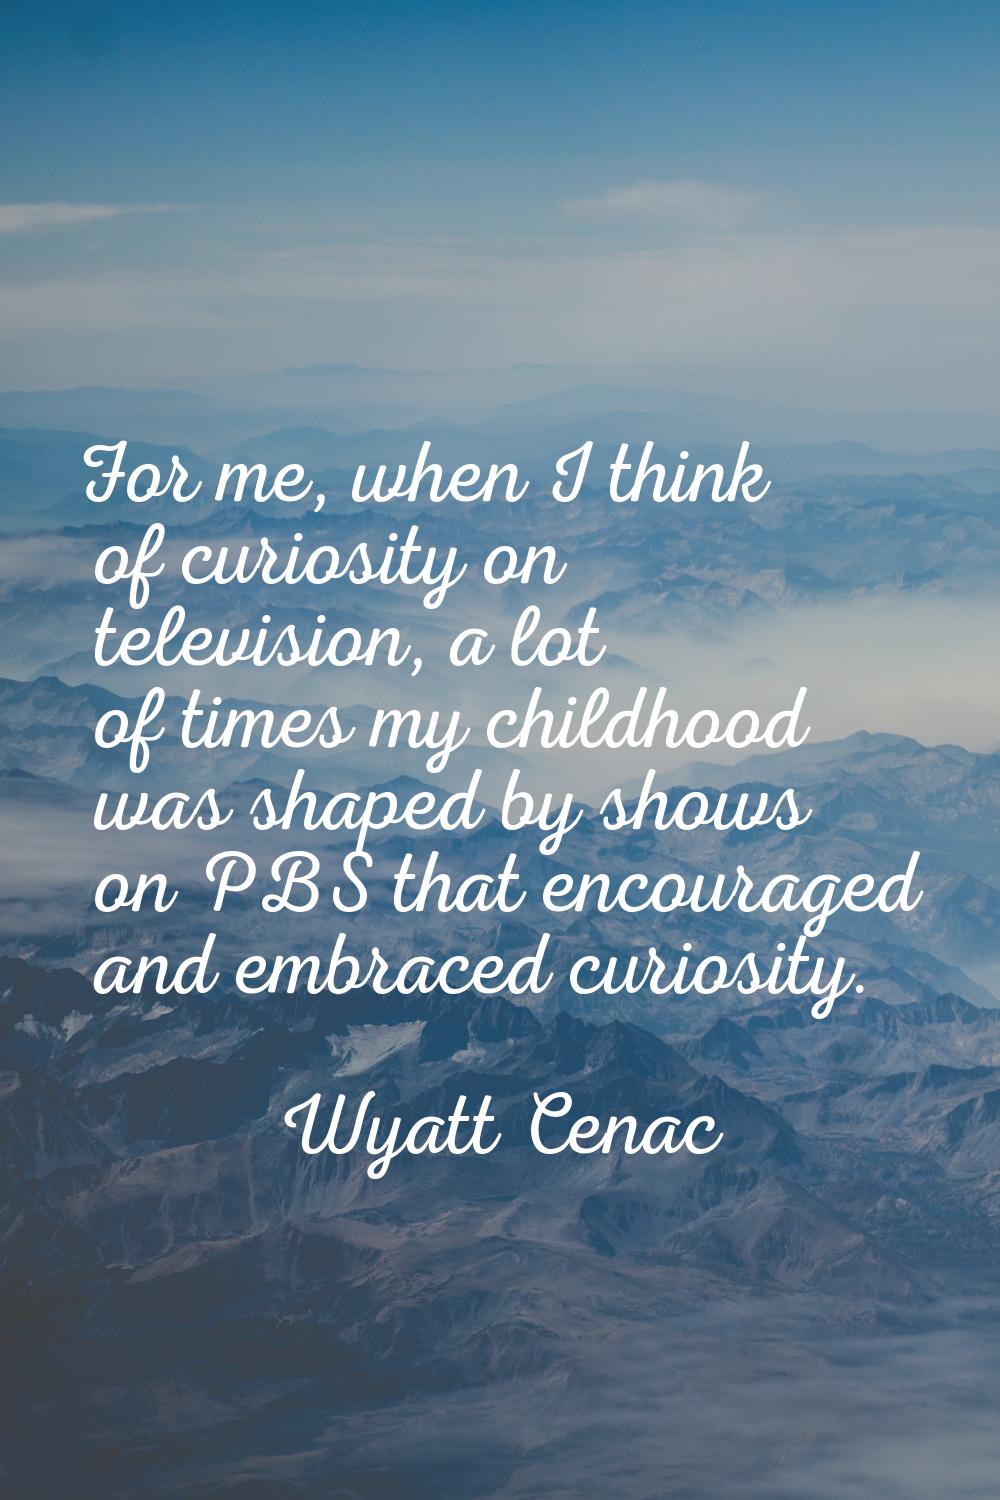 For me, when I think of curiosity on television, a lot of times my childhood was shaped by shows on